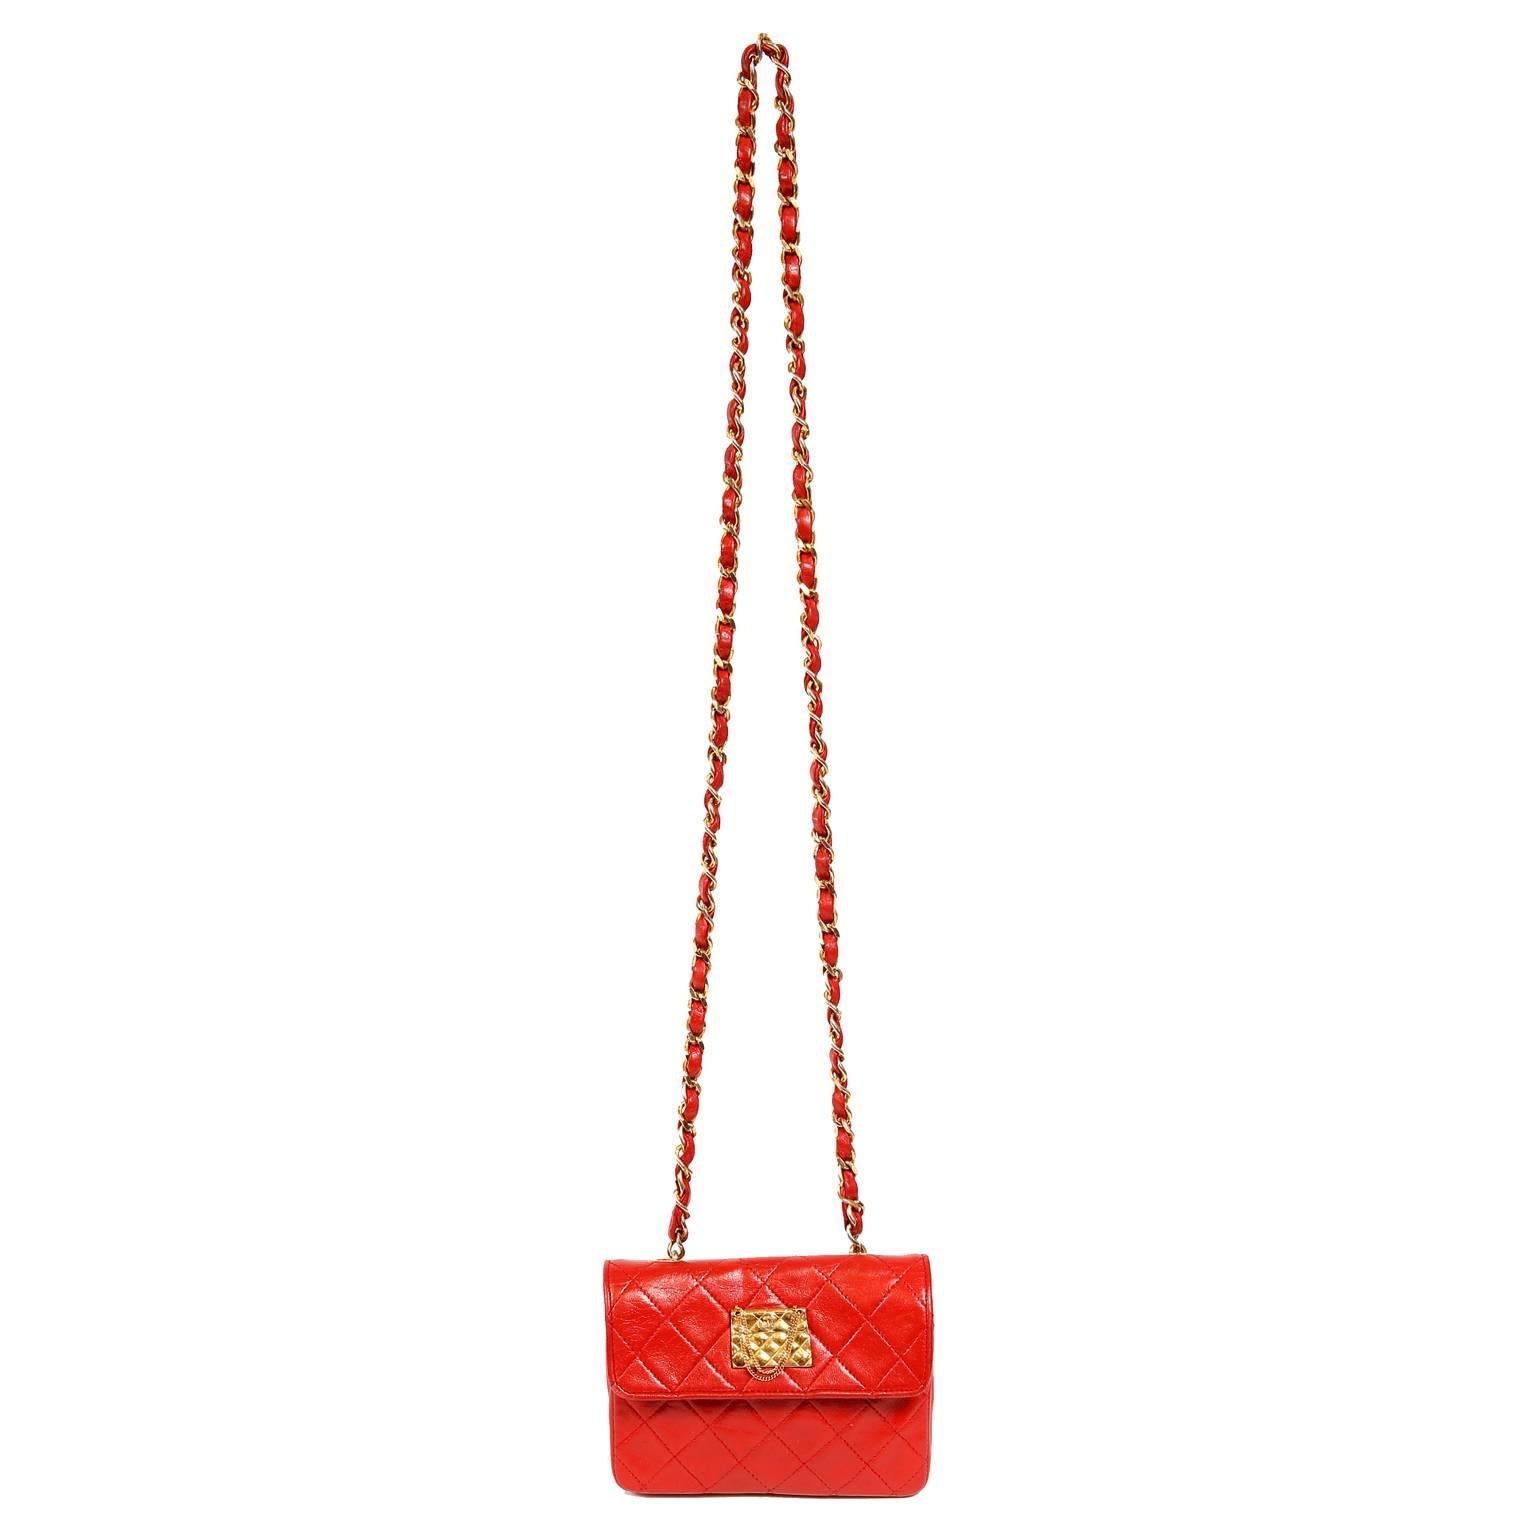 Chanel Red Leather Mini Classic Flap Bag 8